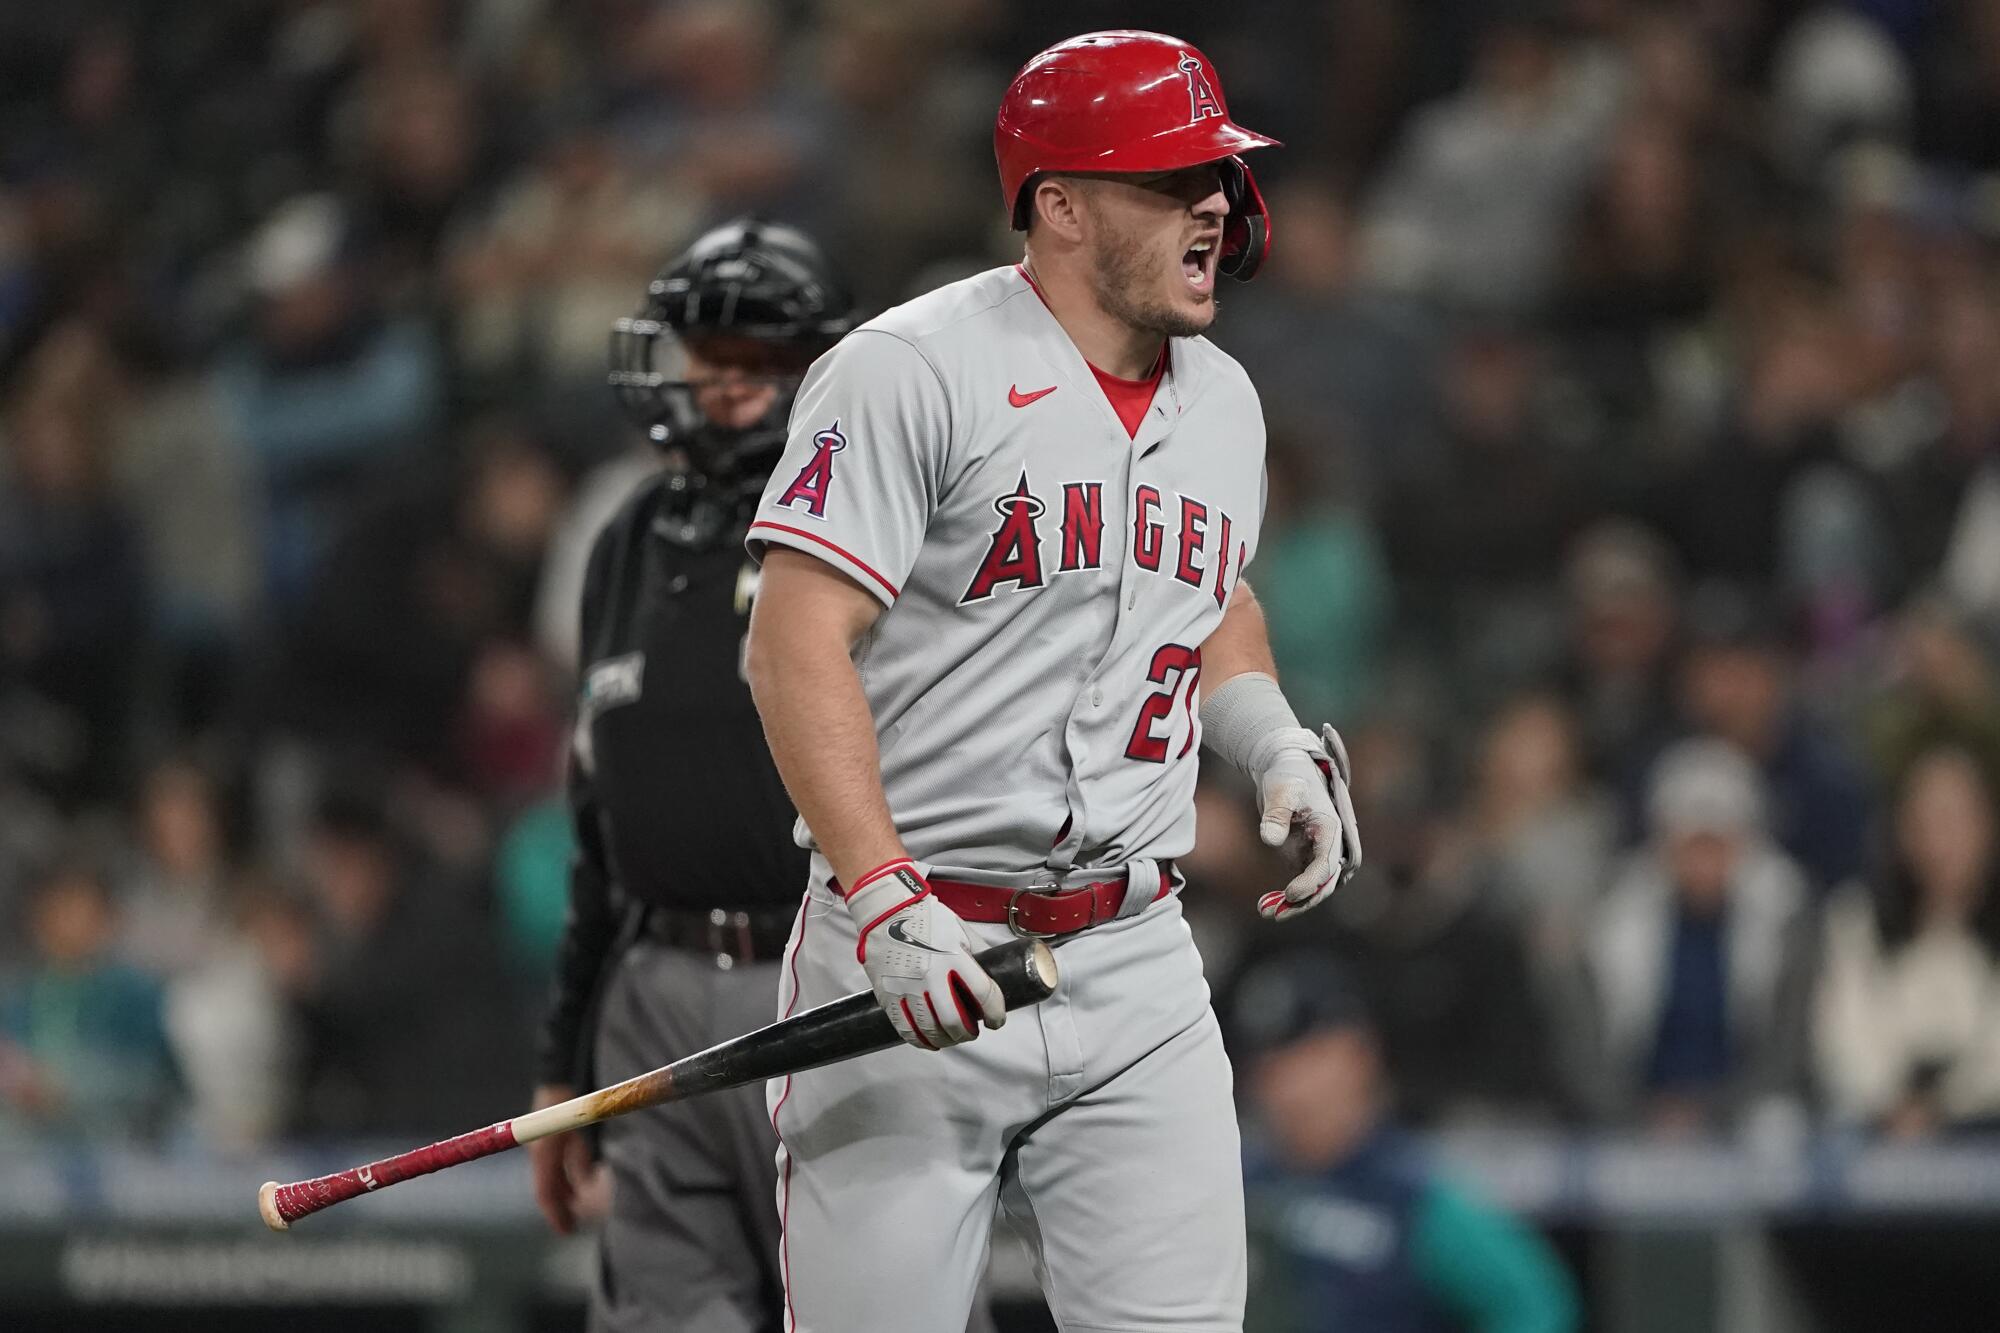 Angels star Mike Trout reacts after fouling a ball off his foot against the Seattle Mariners on June 18.